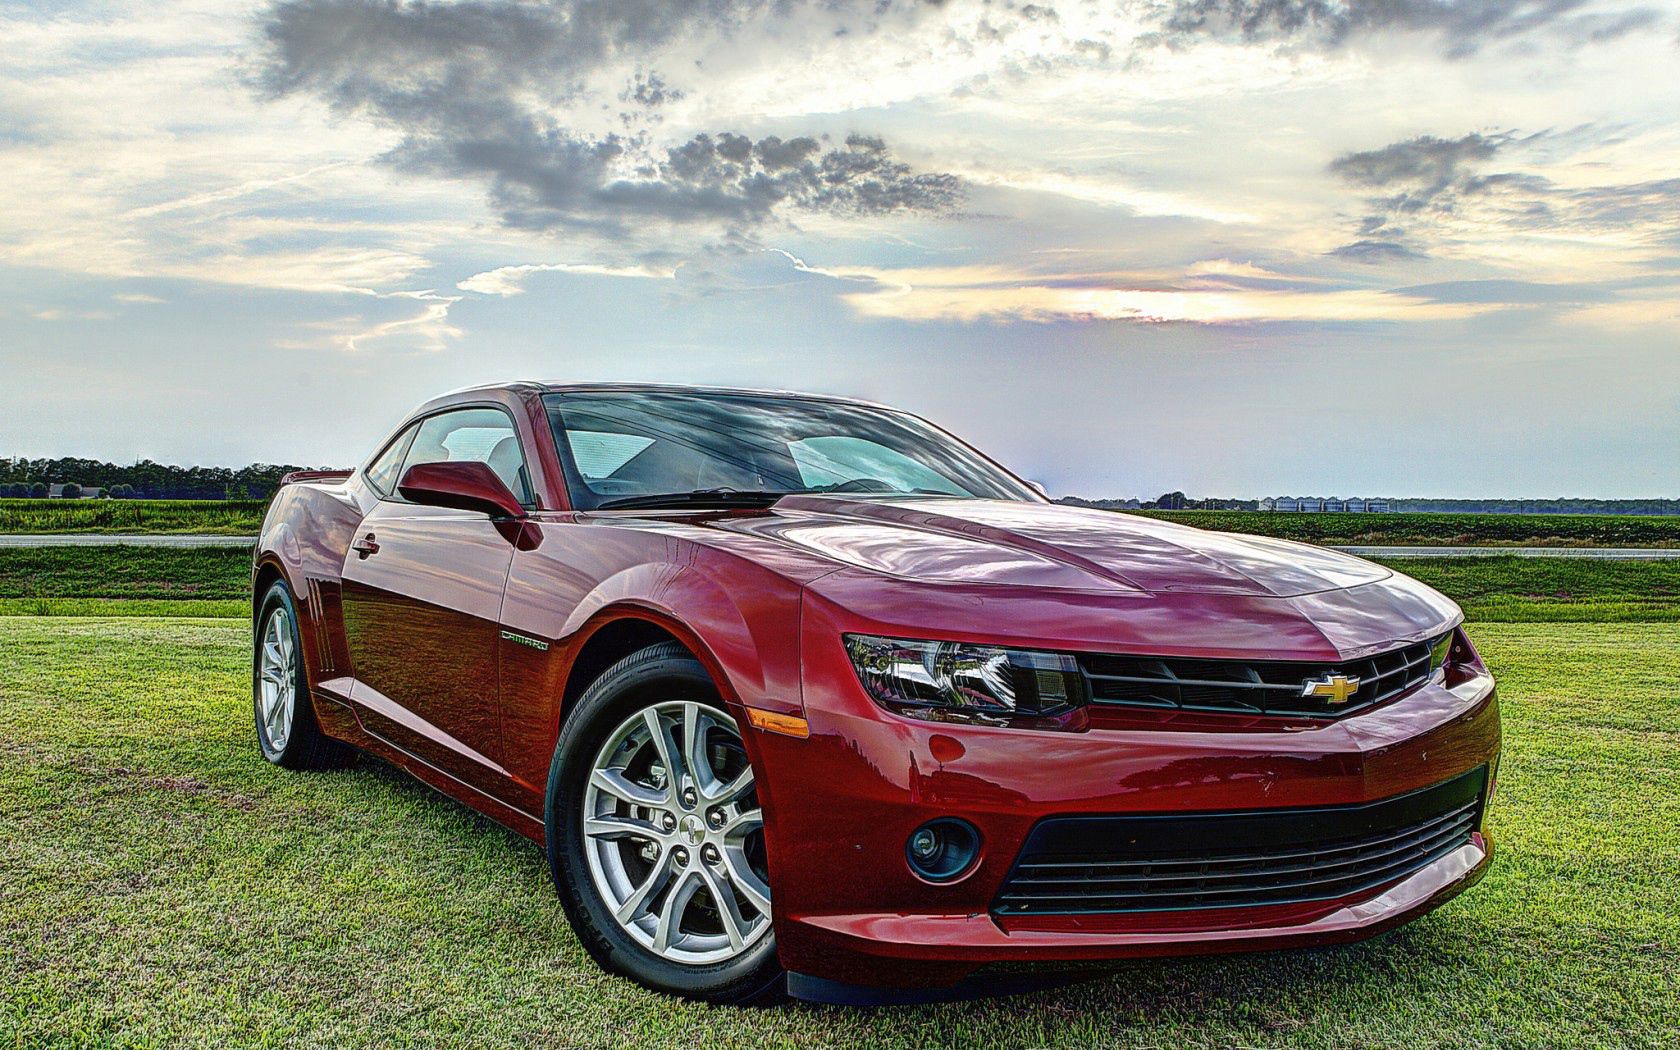 Windows Backgrounds chevrolet, nature, cars, side view, camaro